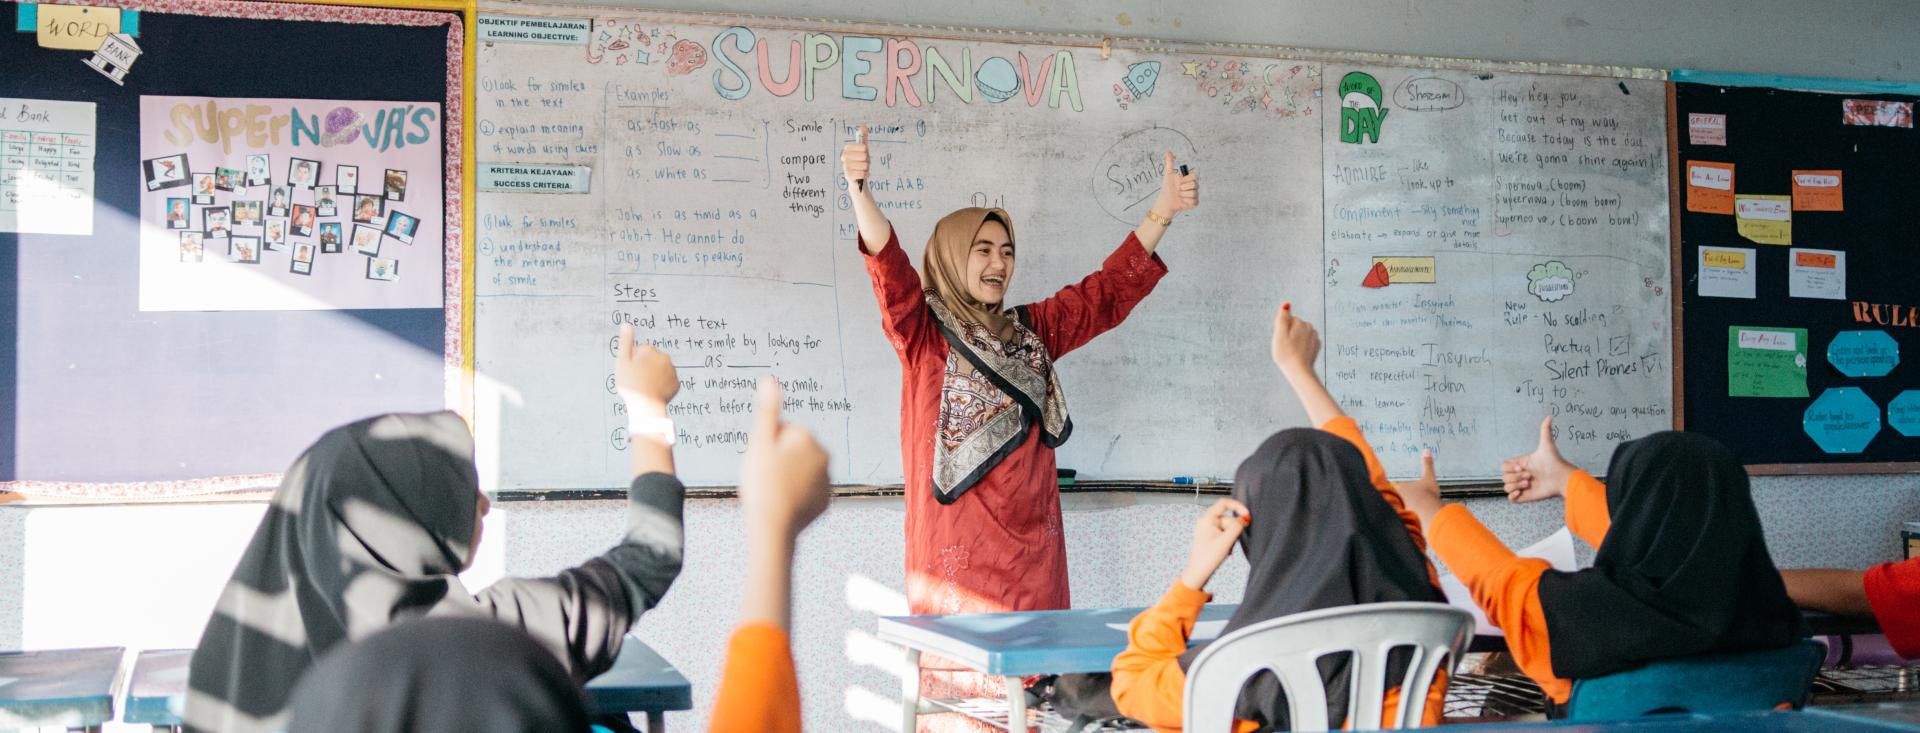 A female teacher in a red dress and head scarf stands in front of a white board facing her students in desks. Everyone raises their arms giving a thumbs-up